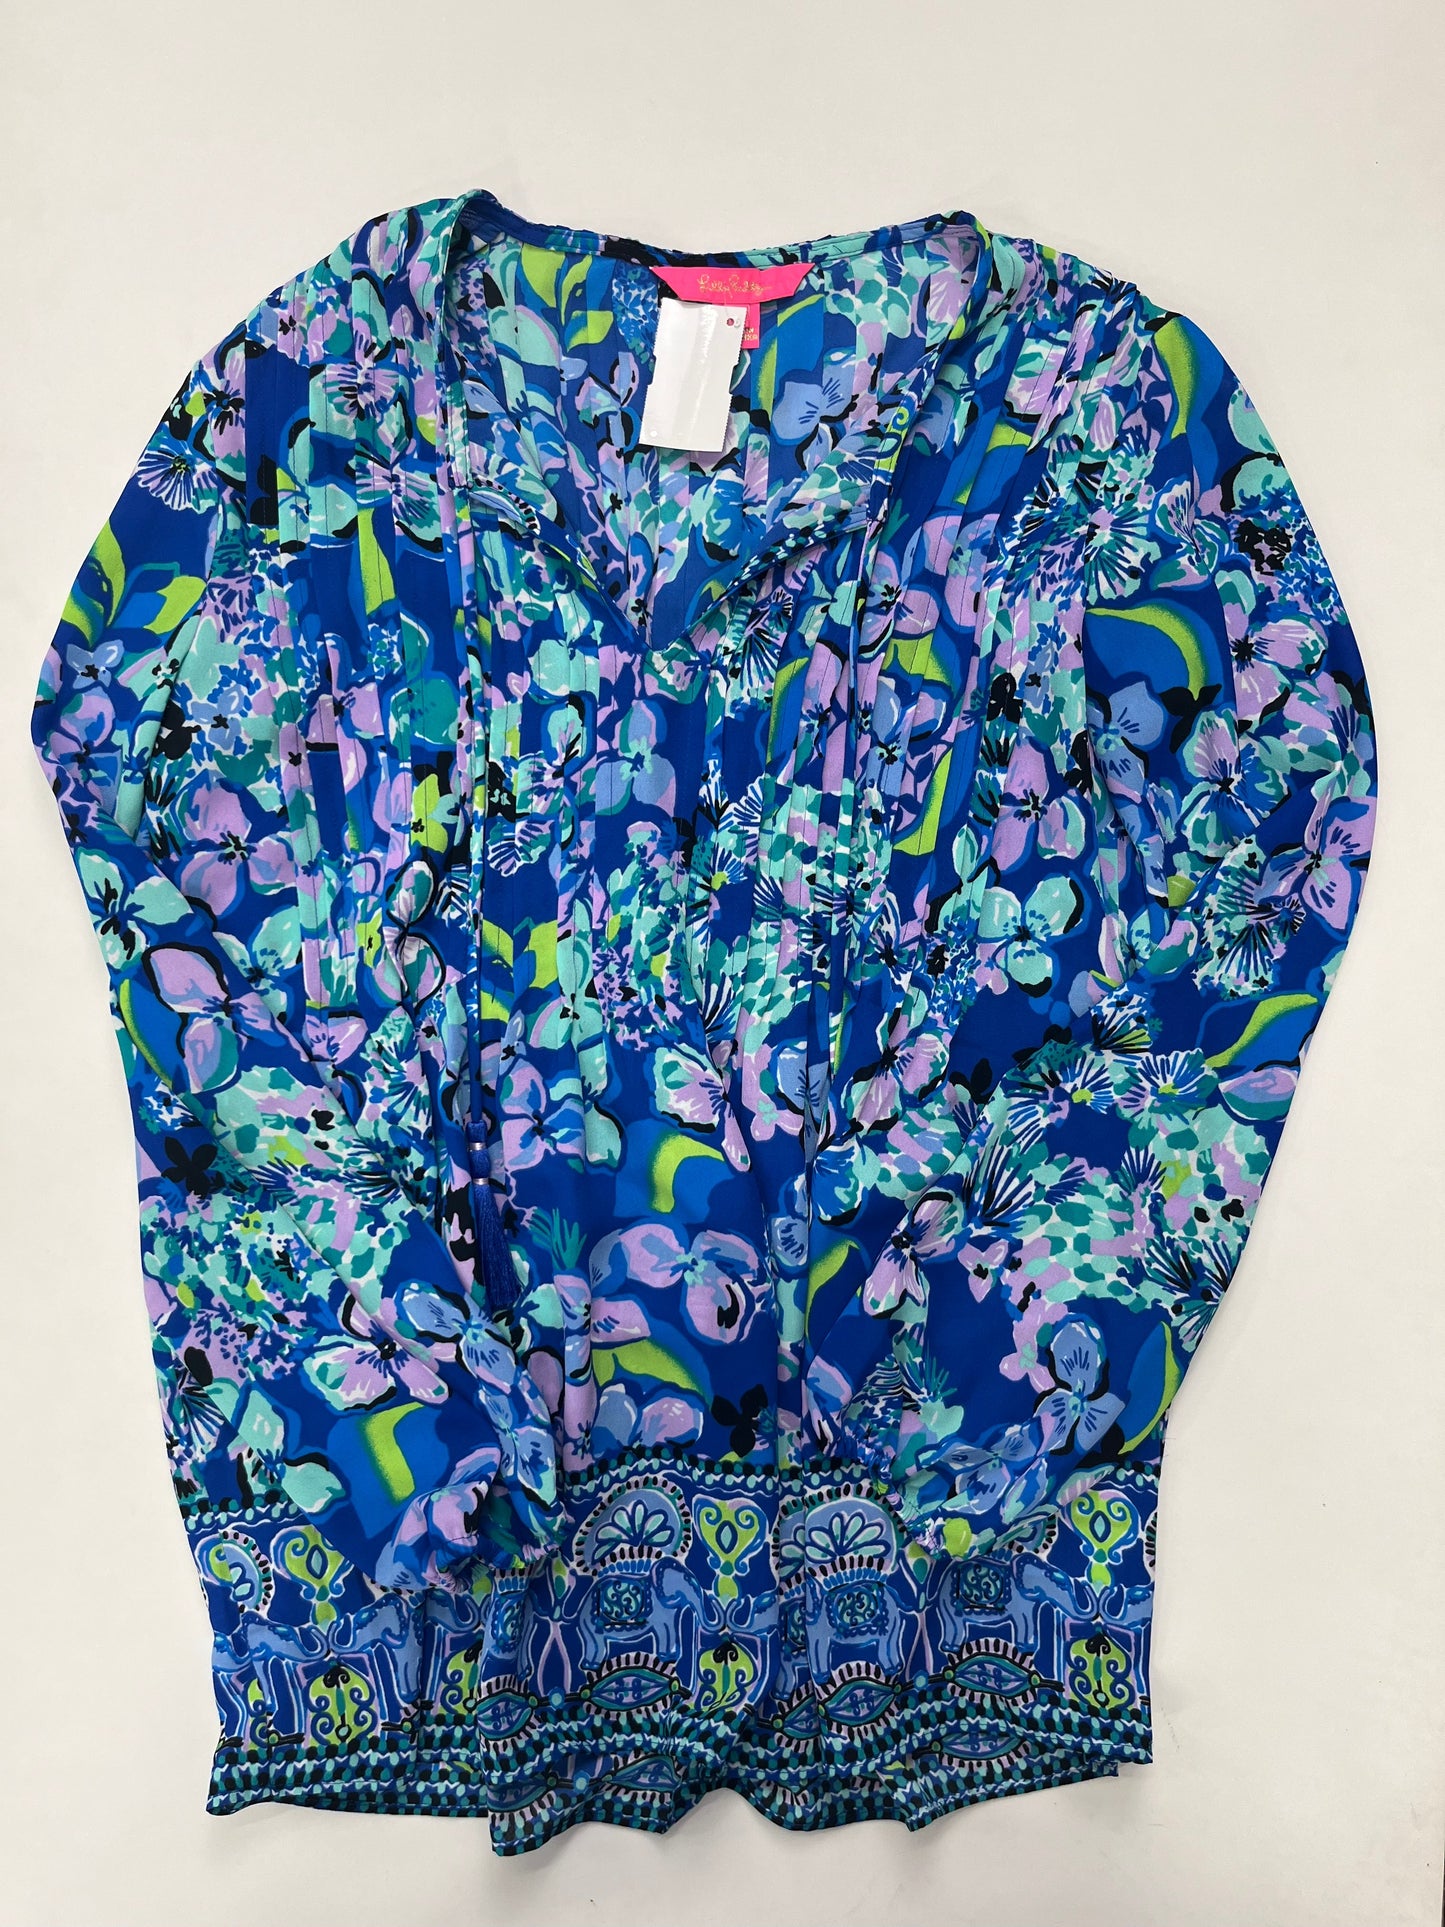 Multi-colored Blouse Long Sleeve Lilly Pulitzer, Size Xs